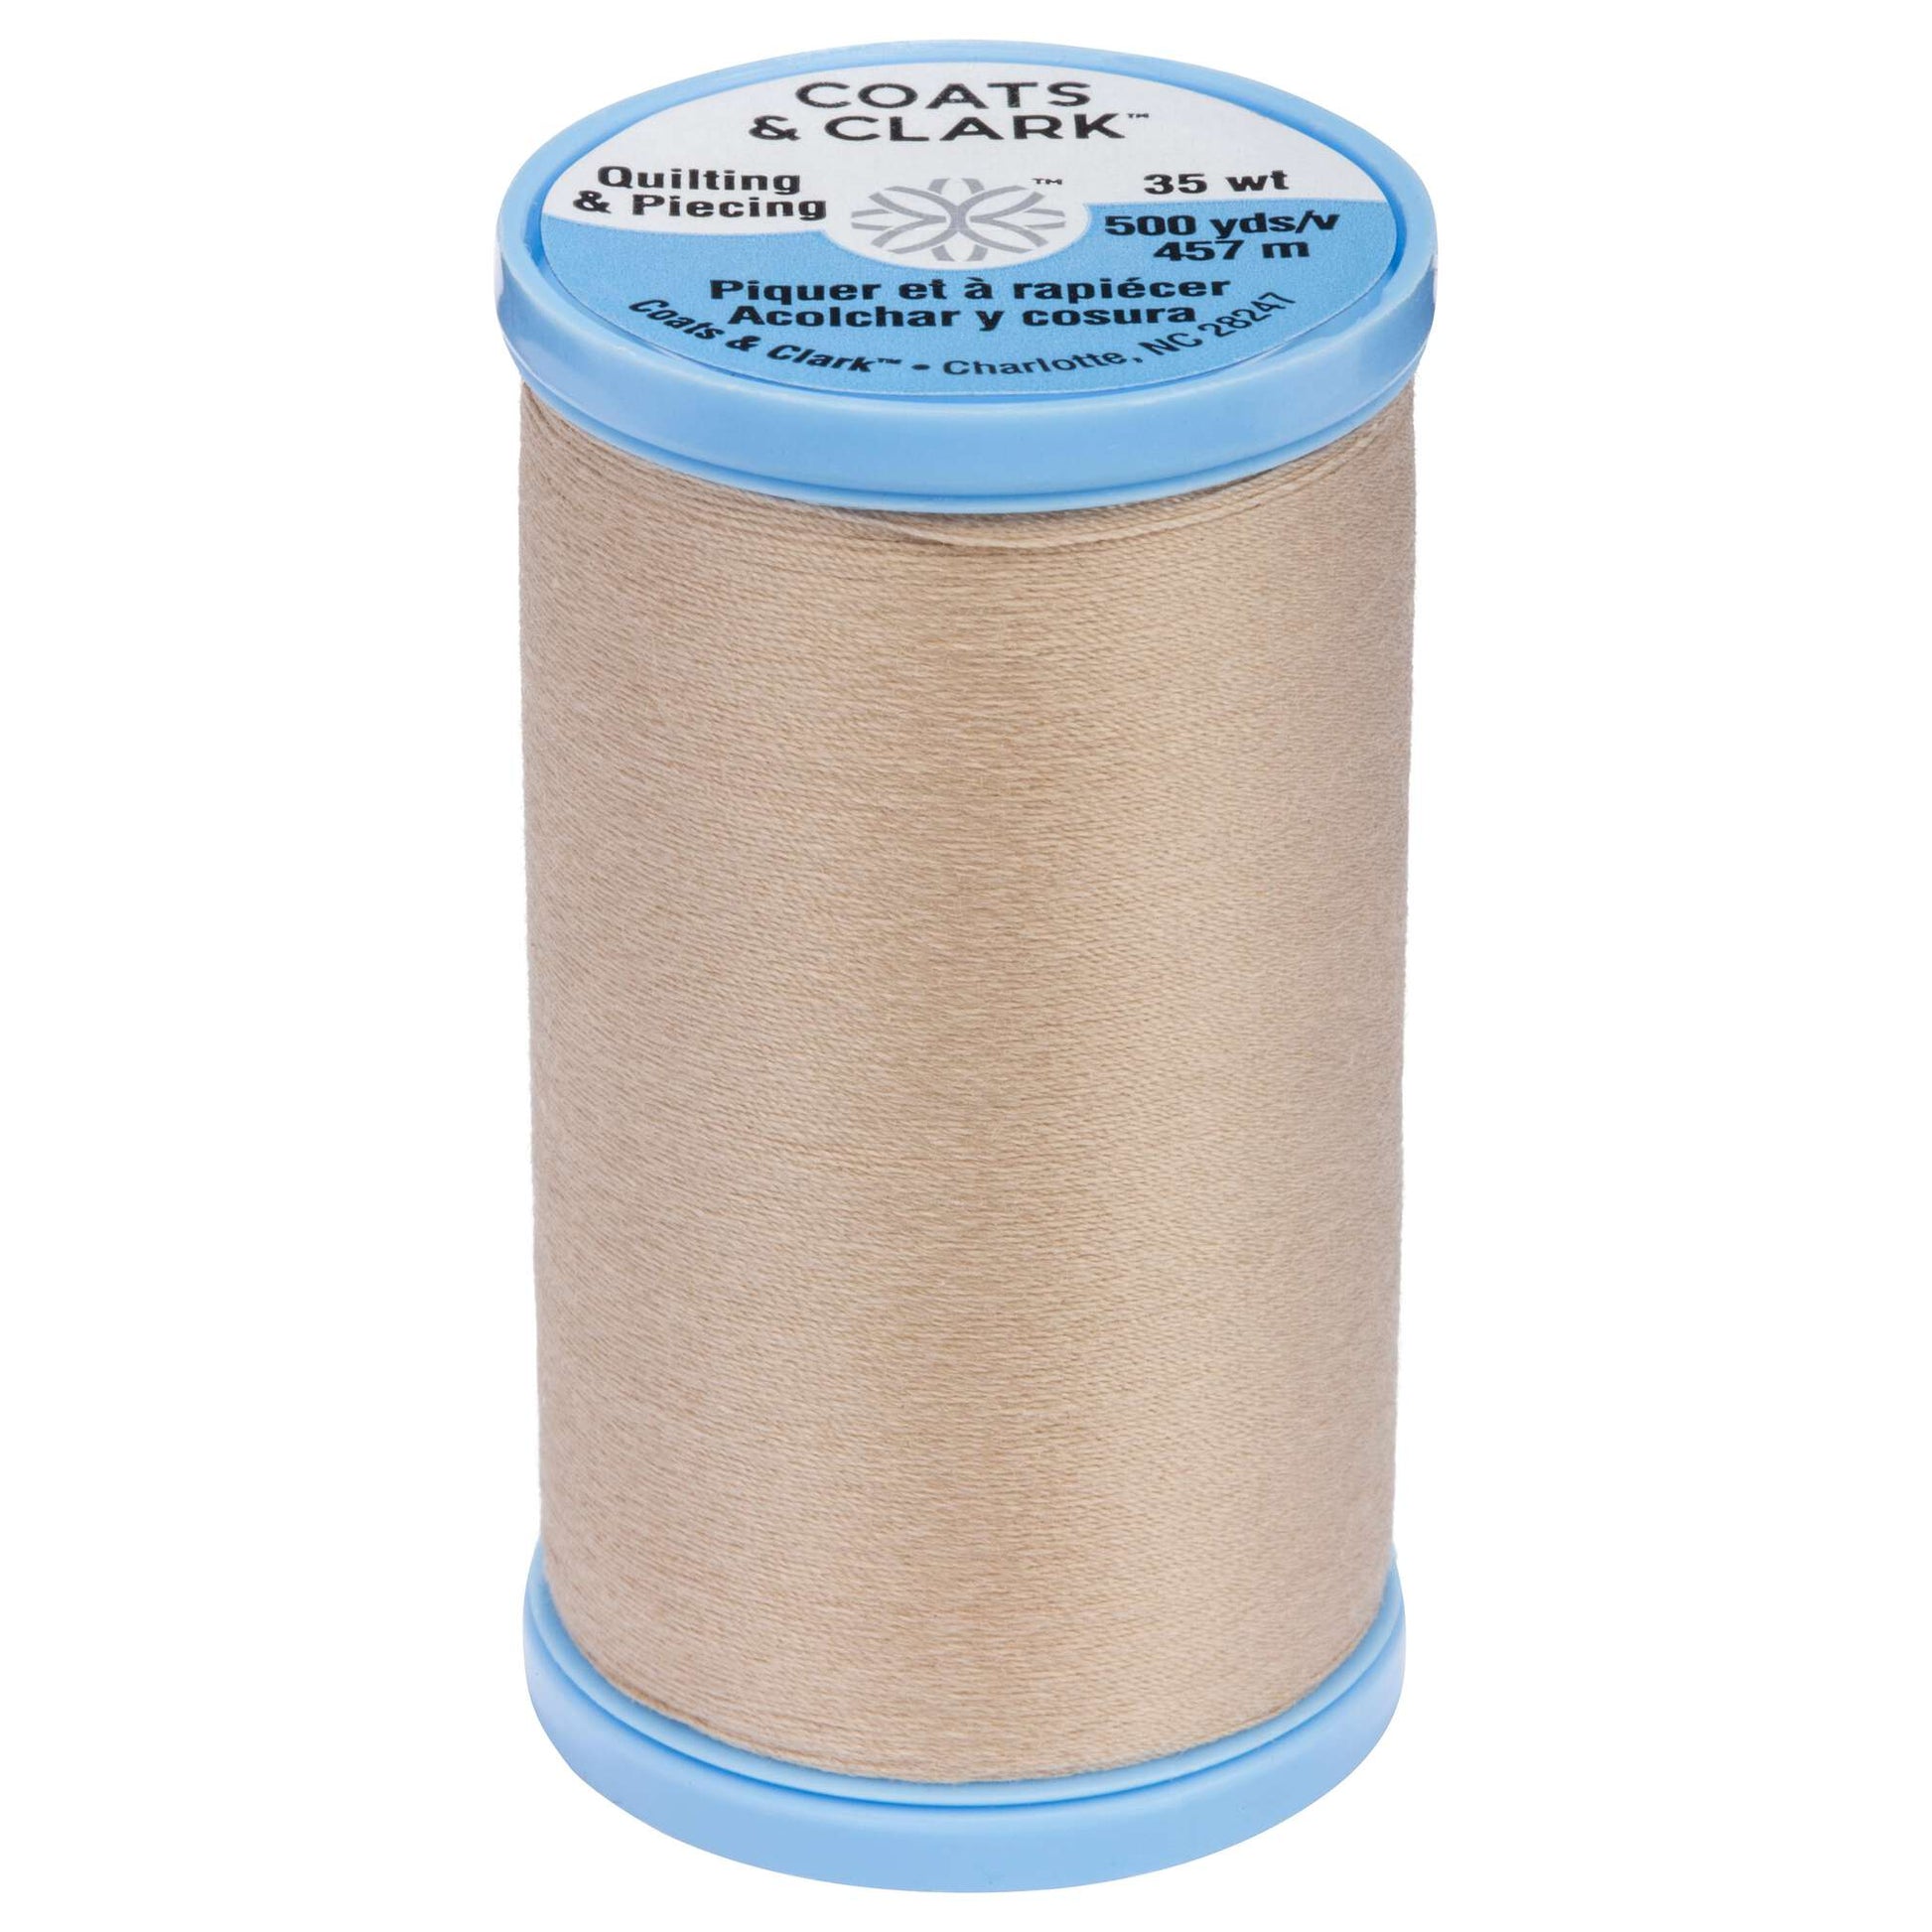 Coats & Clark Cotton Covered Quilting & Piecing Thread (500 Yards) Buff